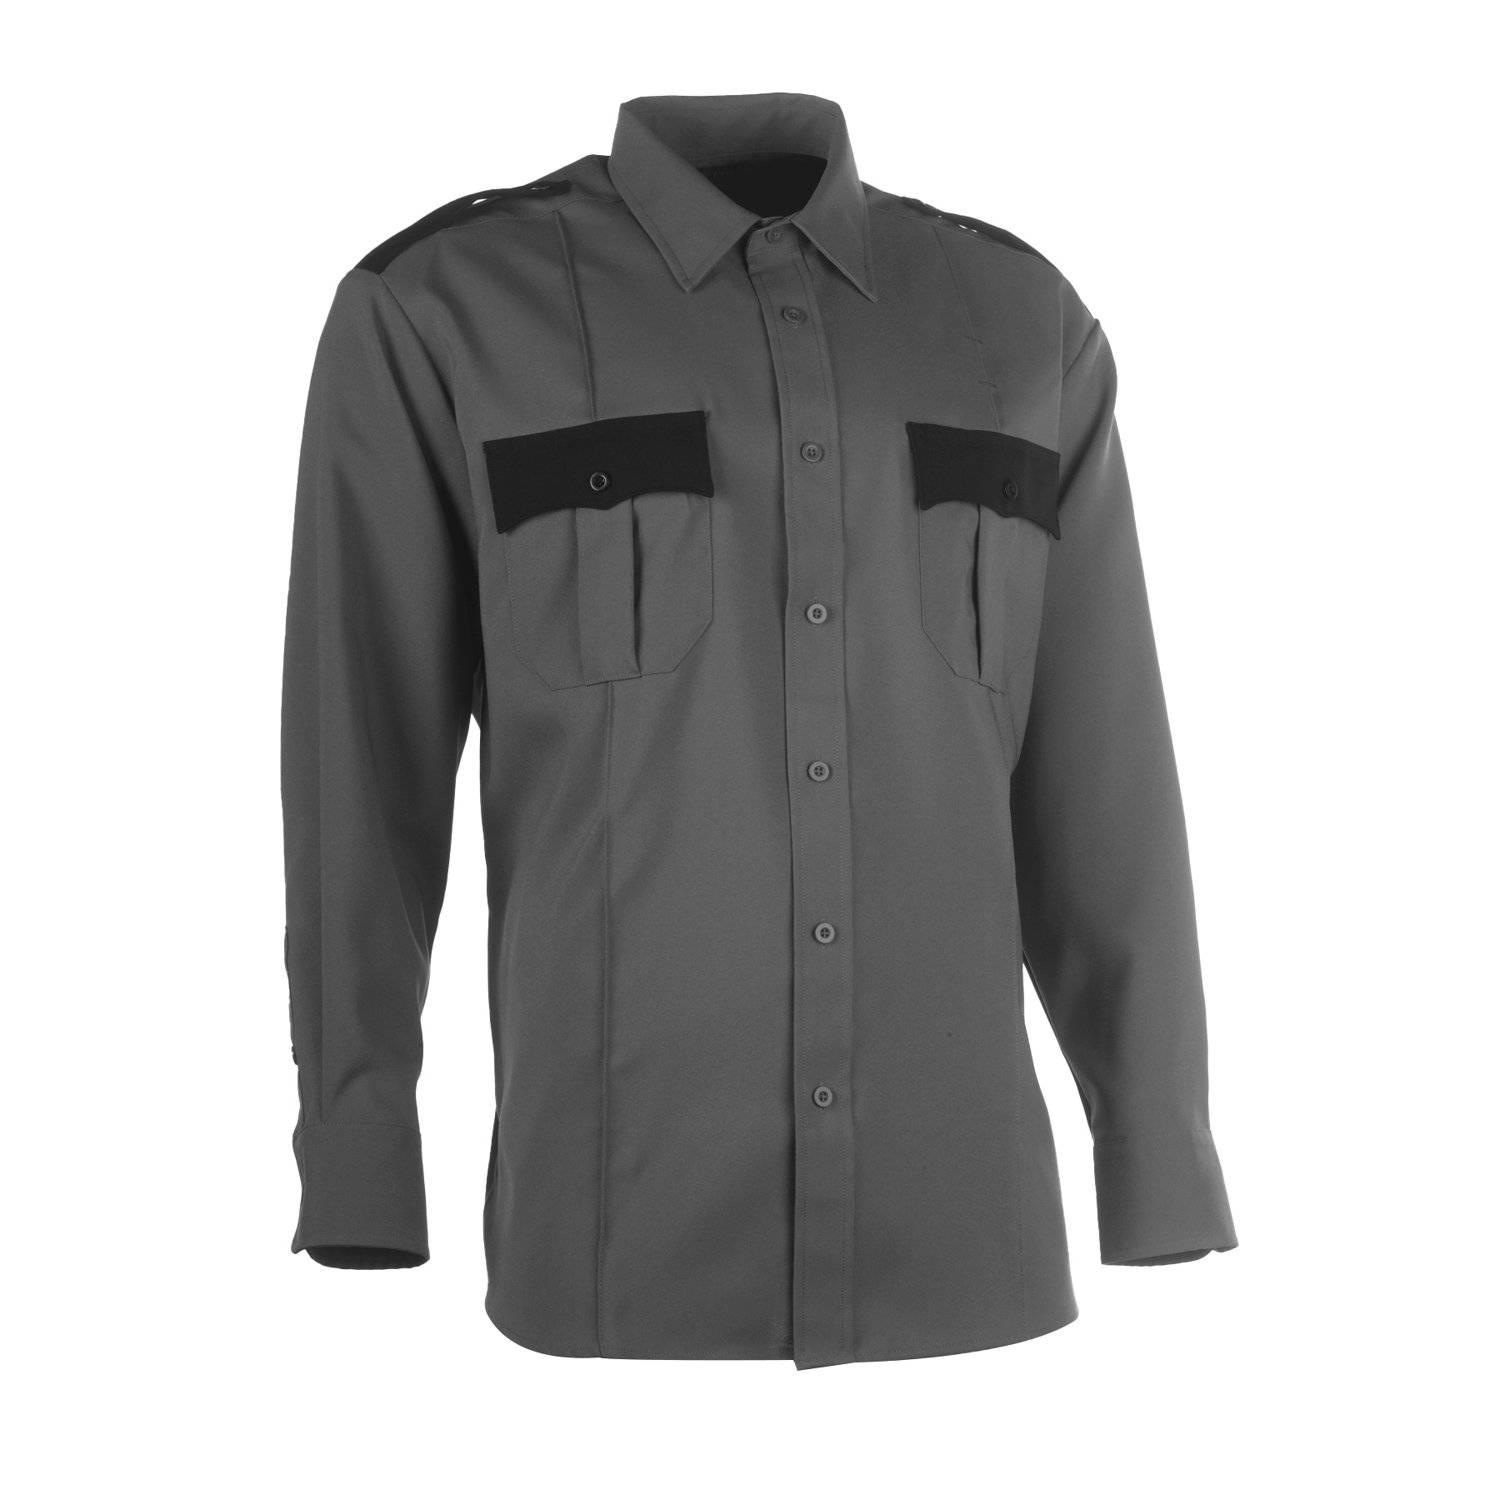 LAWPRO+ UNISEX TWO-TONE POLYESTER LONG SLEEVE SHIRT